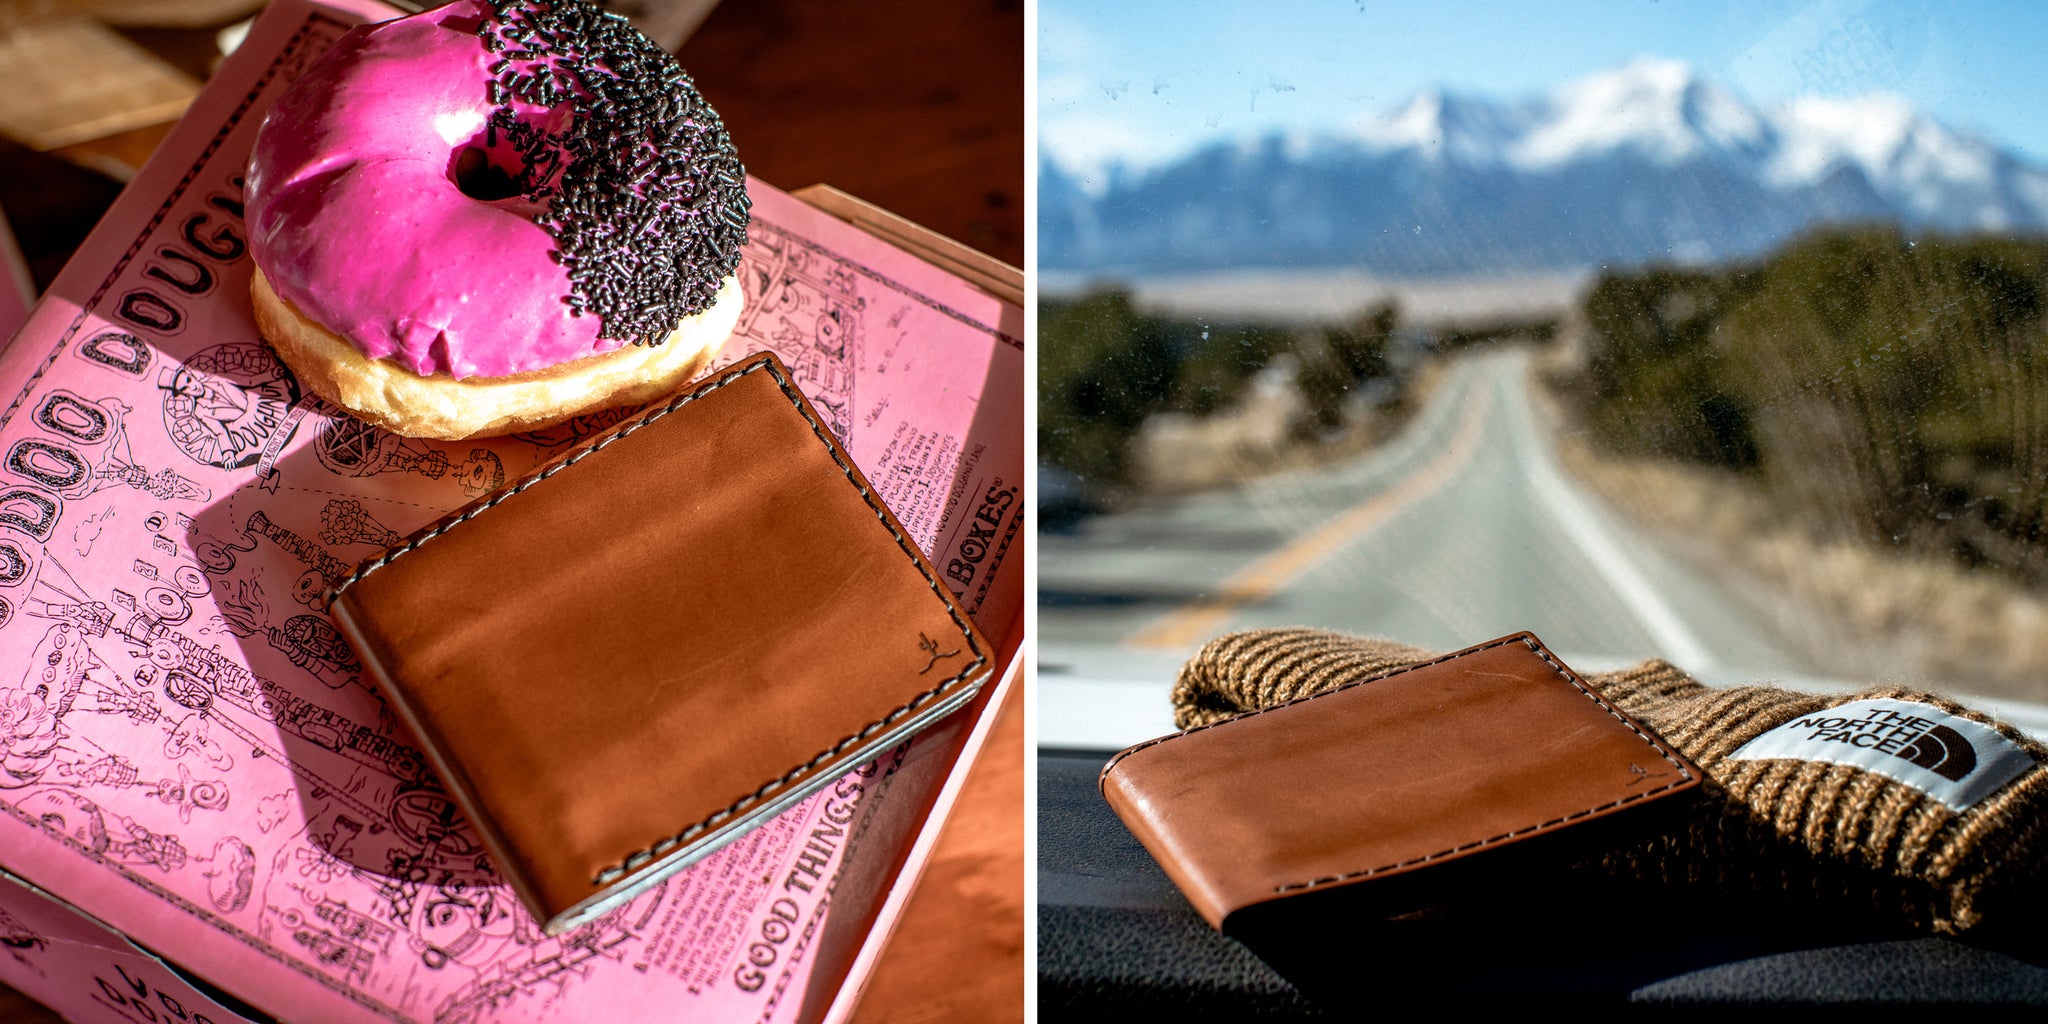 Two images. First image shows a pink box of donuts and a leather wallet sitting on a table. Second Photo shows a leather wallet sitting on a dashboard of a vehicle with mountains in the background